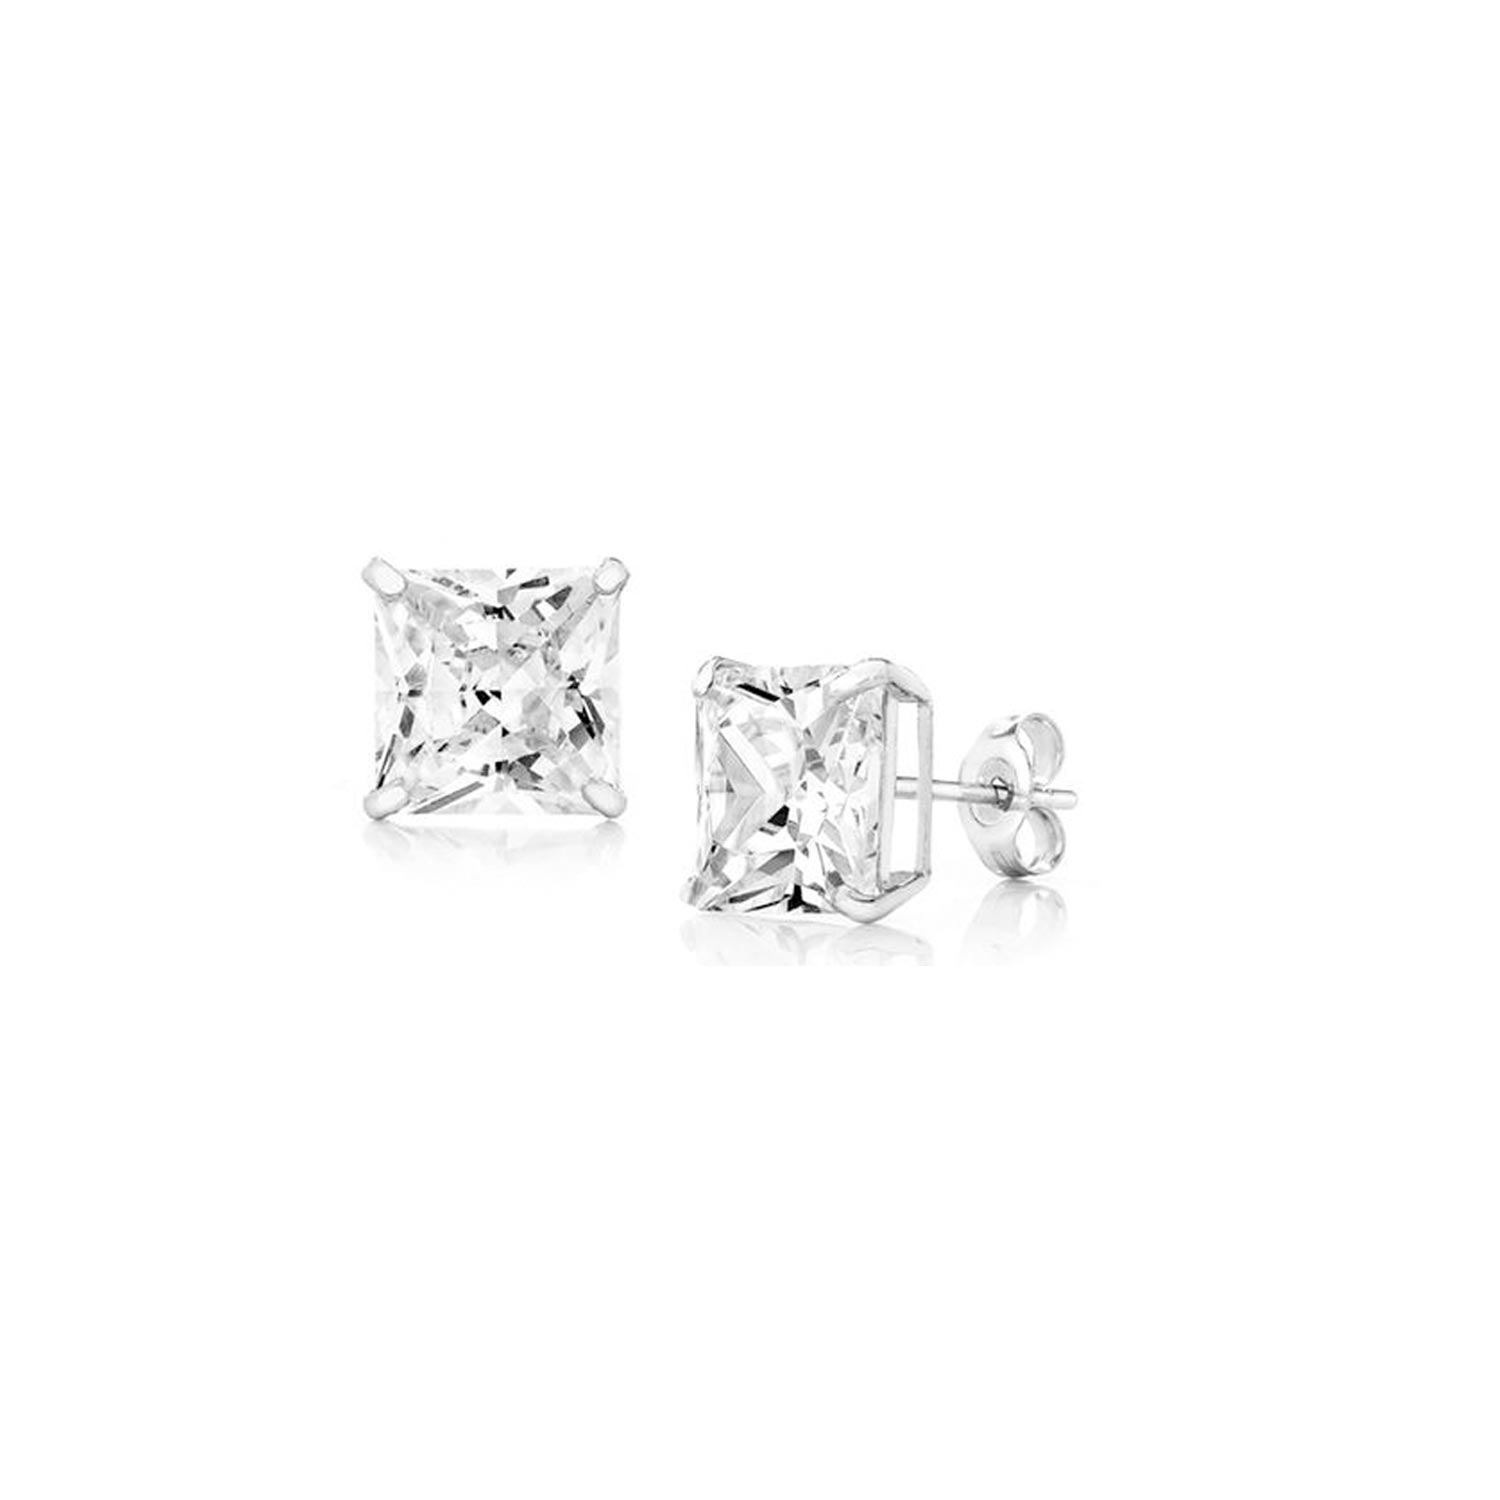 14K White Gold Stud Earrings Made with Swarovski Elements